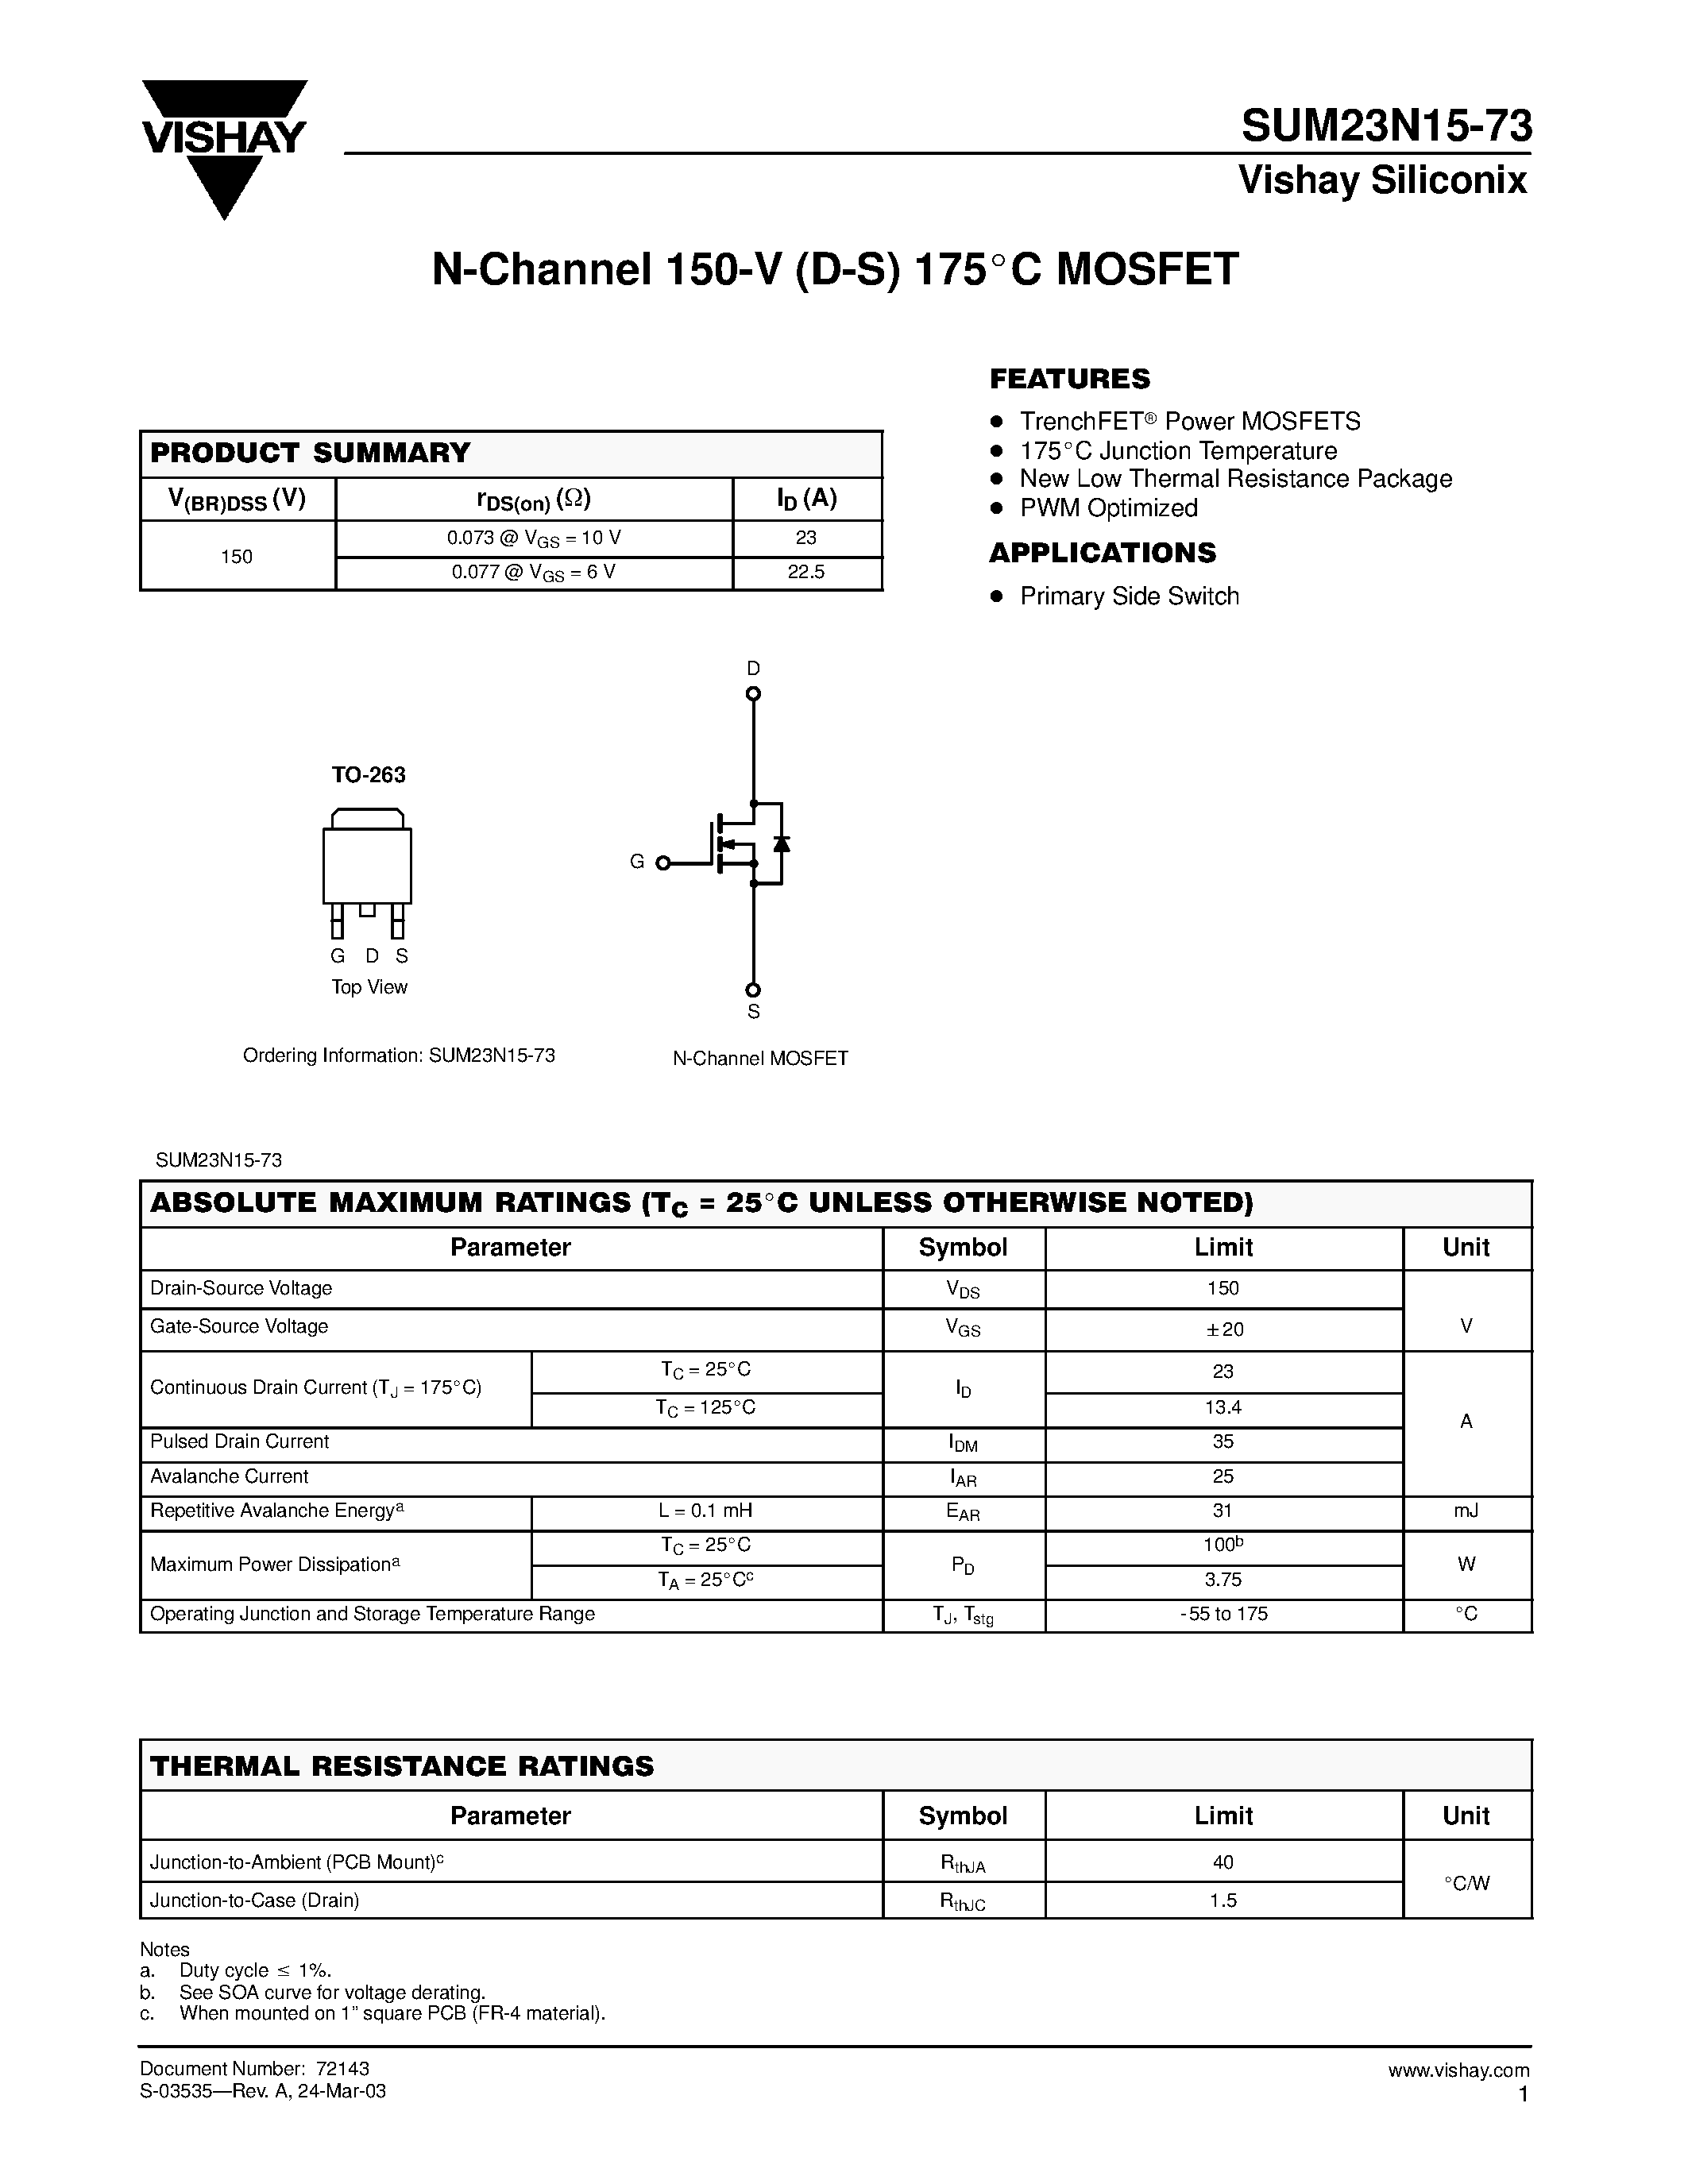 Datasheet SUM23N15-73 - N-Channel 150-V (D-S) 175 C MOSFET page 1